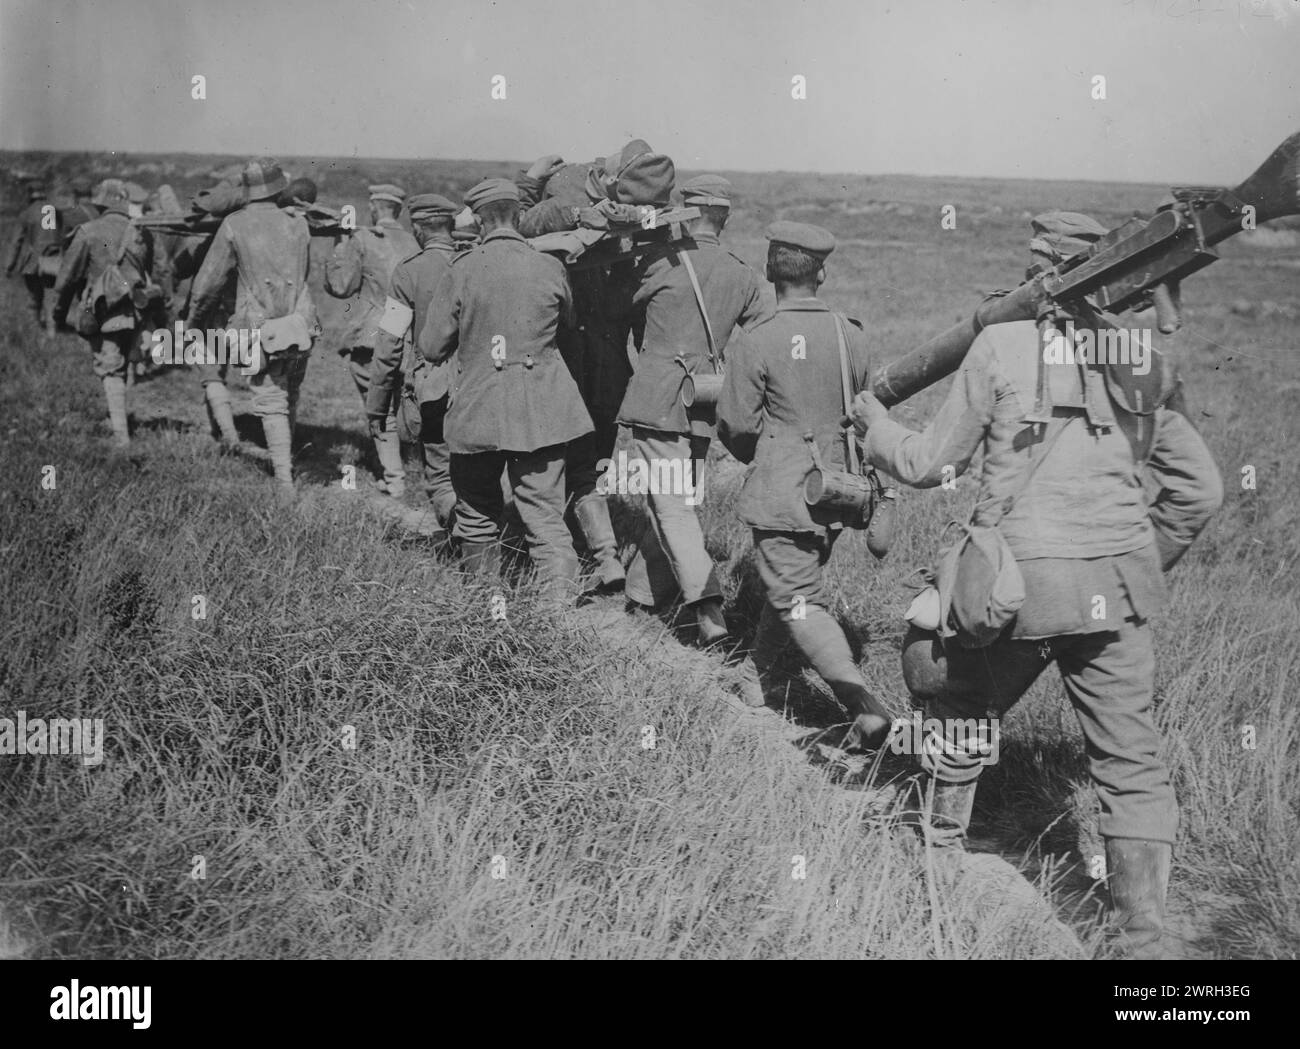 German prisoners with machine guns &amp; wounded, 21 Aug 1918. German prisoners bringing in wounded soldiers and captured machine guns during the third Battle of the Albert, near Courcelles, France, August 21, 1918 during World War I. Stock Photo